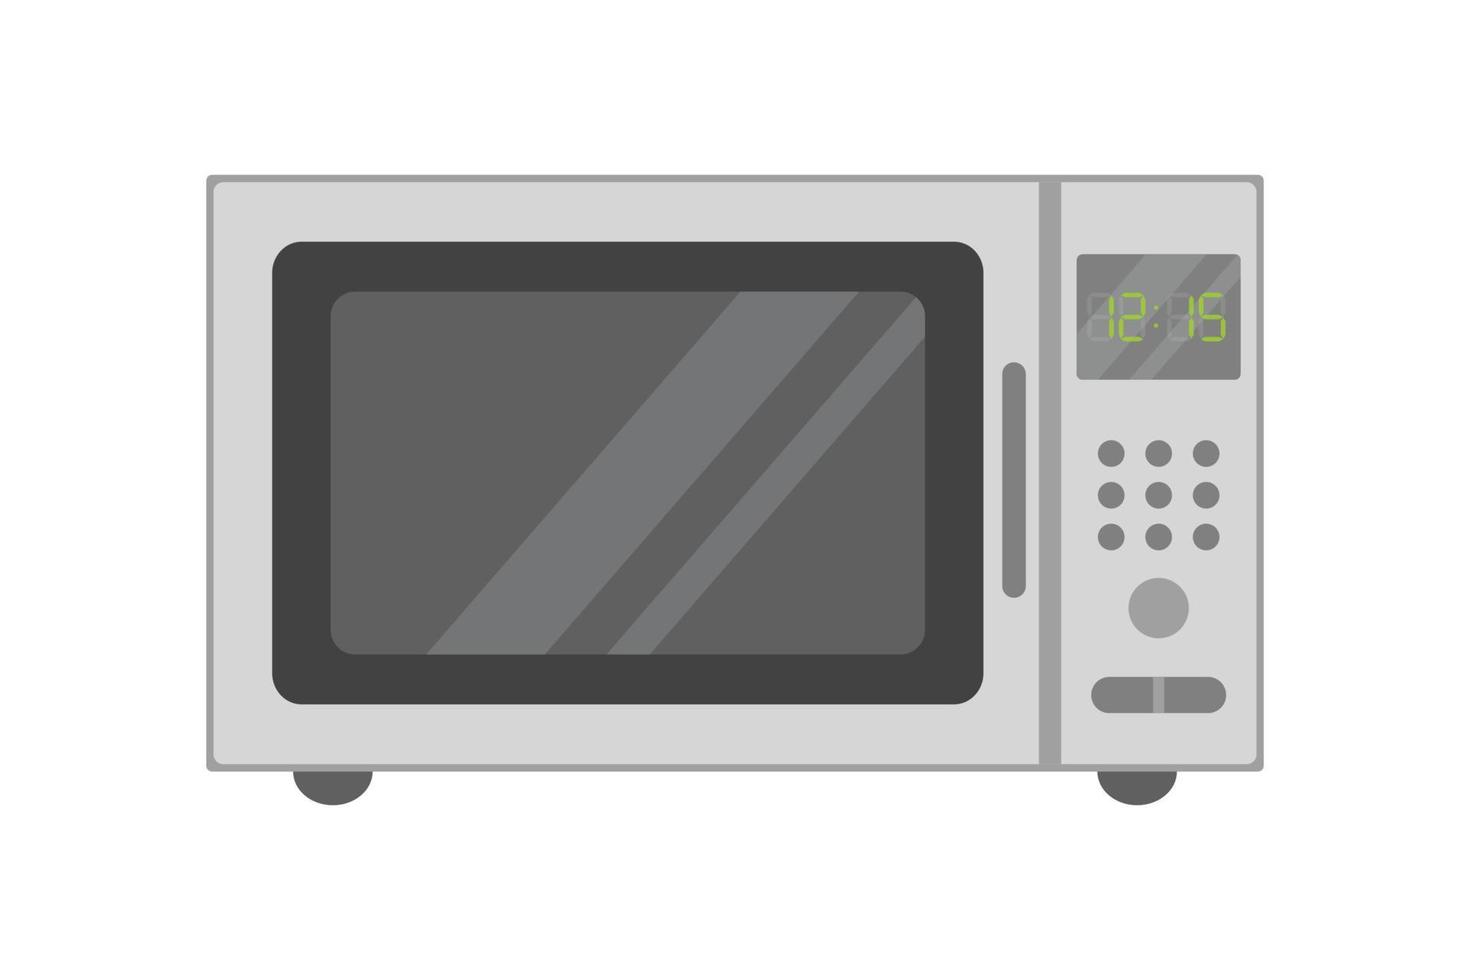 Microwave oven front view, vector illustration. Electric oven, kitchen appliance.